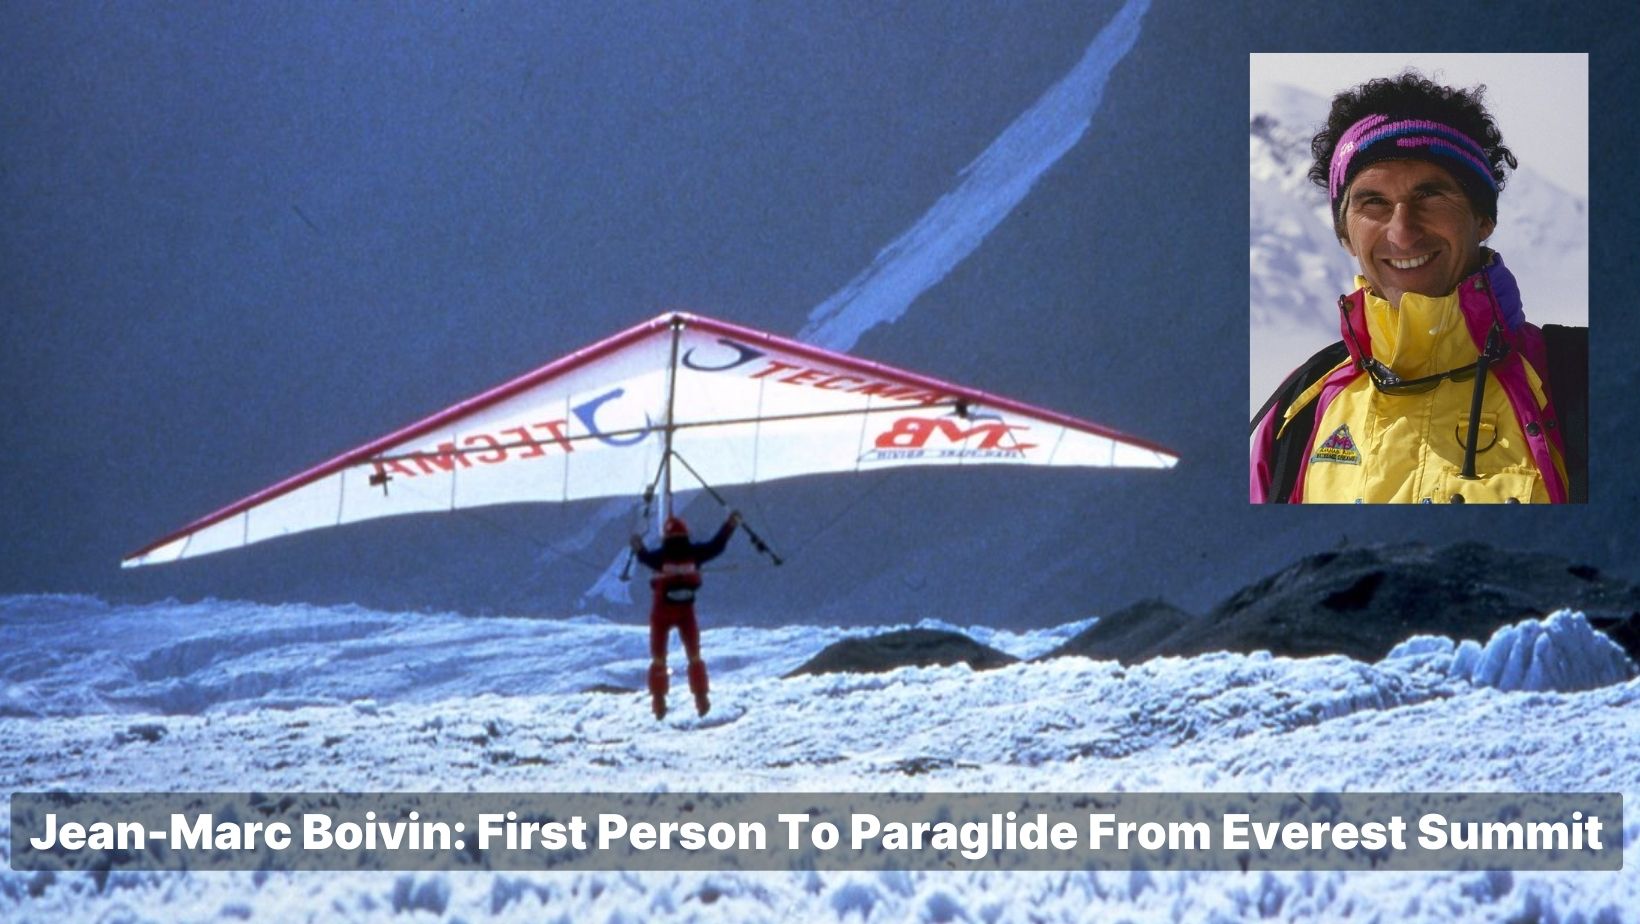 Jean-Marc Boivin: First Person To Paraglide From Everest Summit